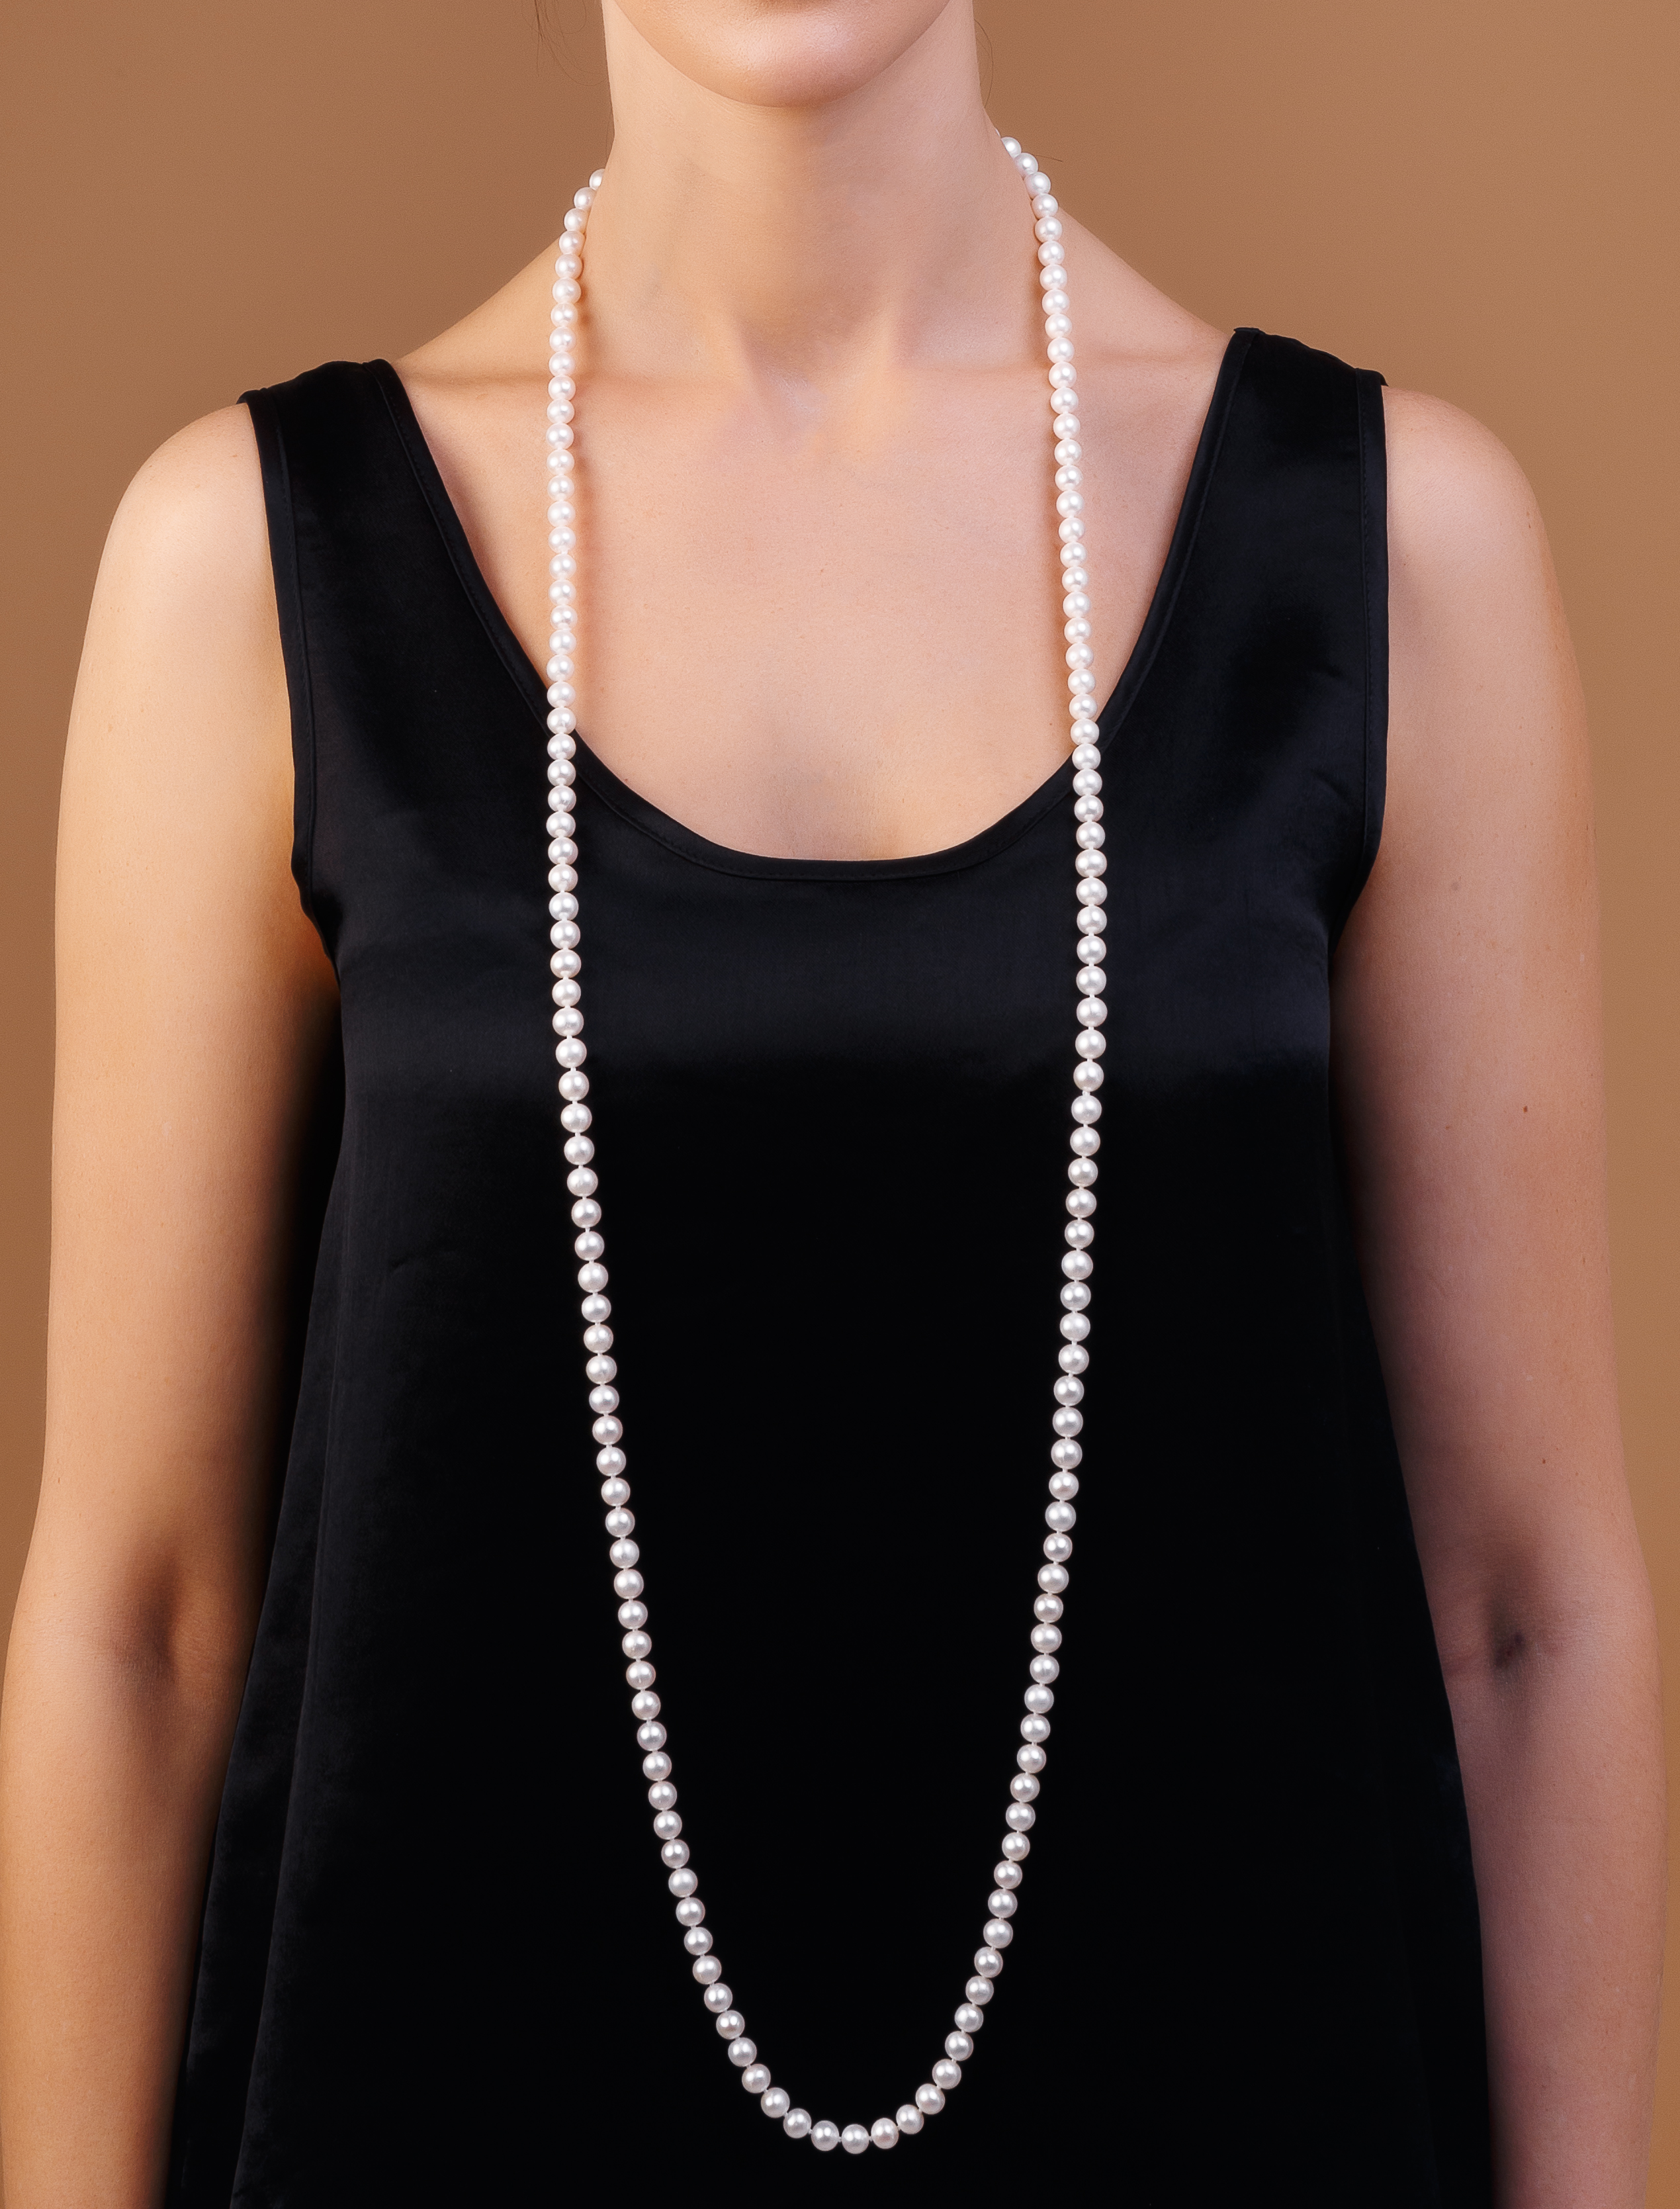 Styles of pearl necklaces